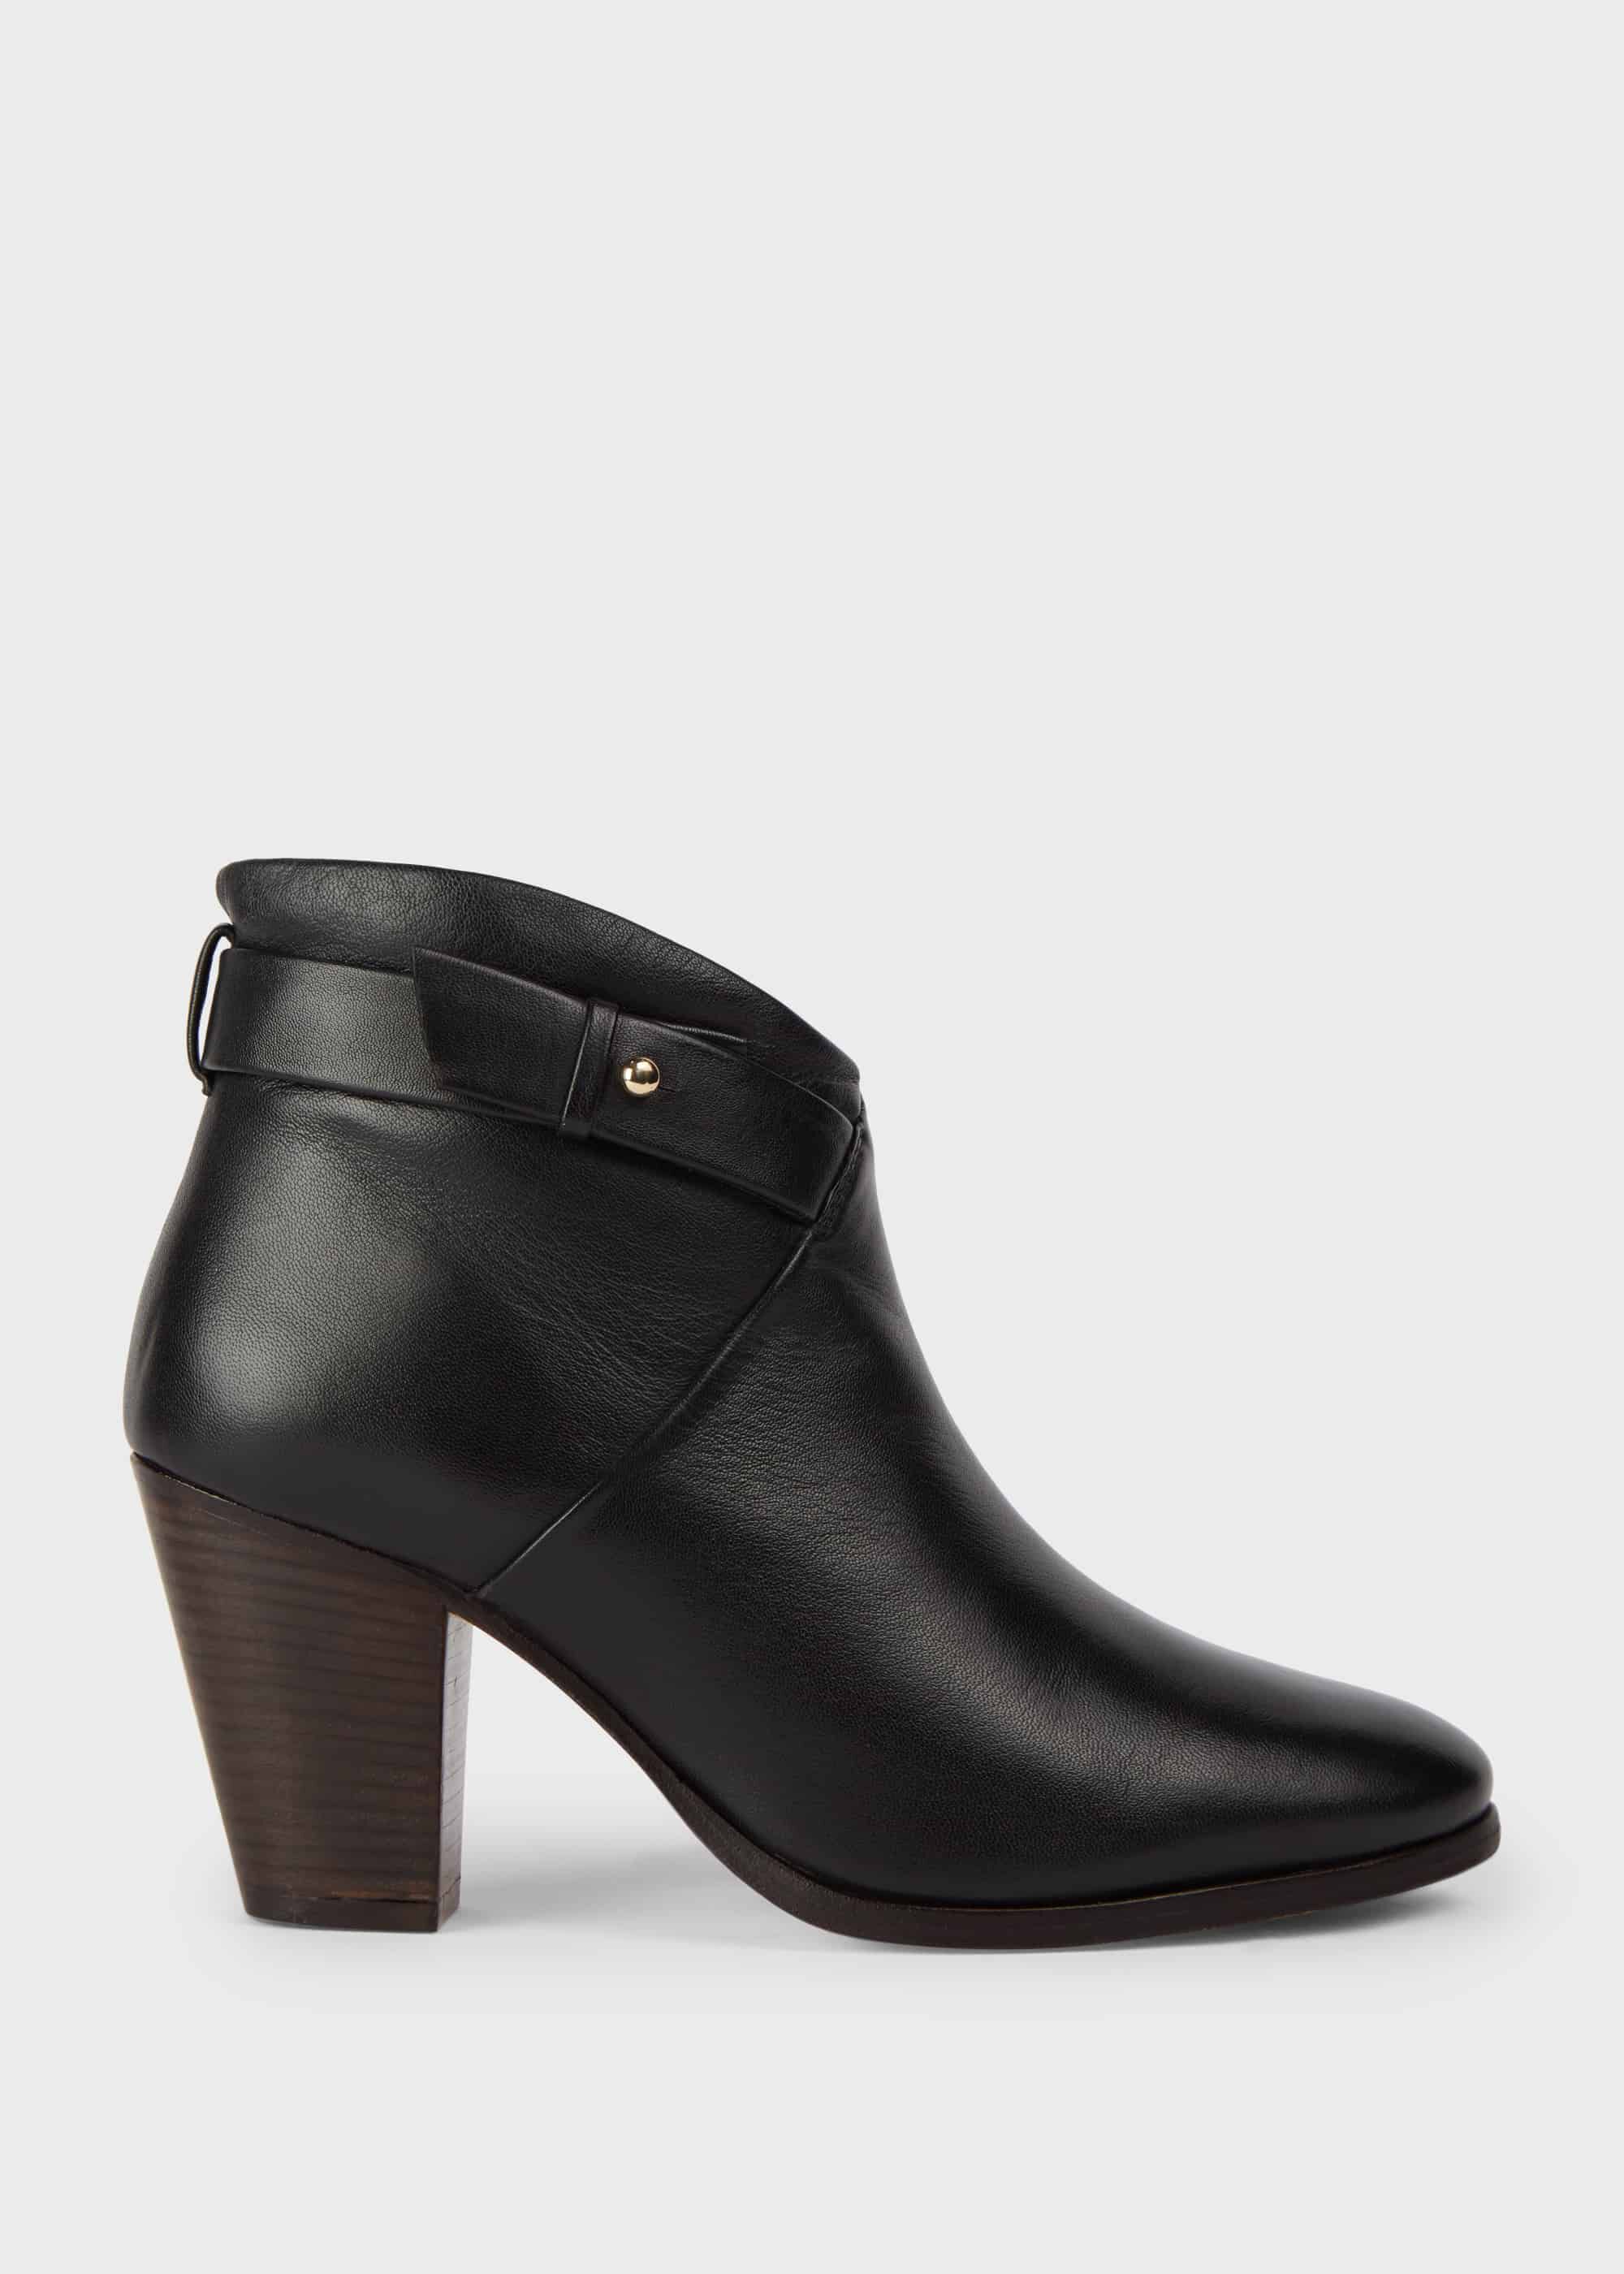 black leather high heel ankle boots